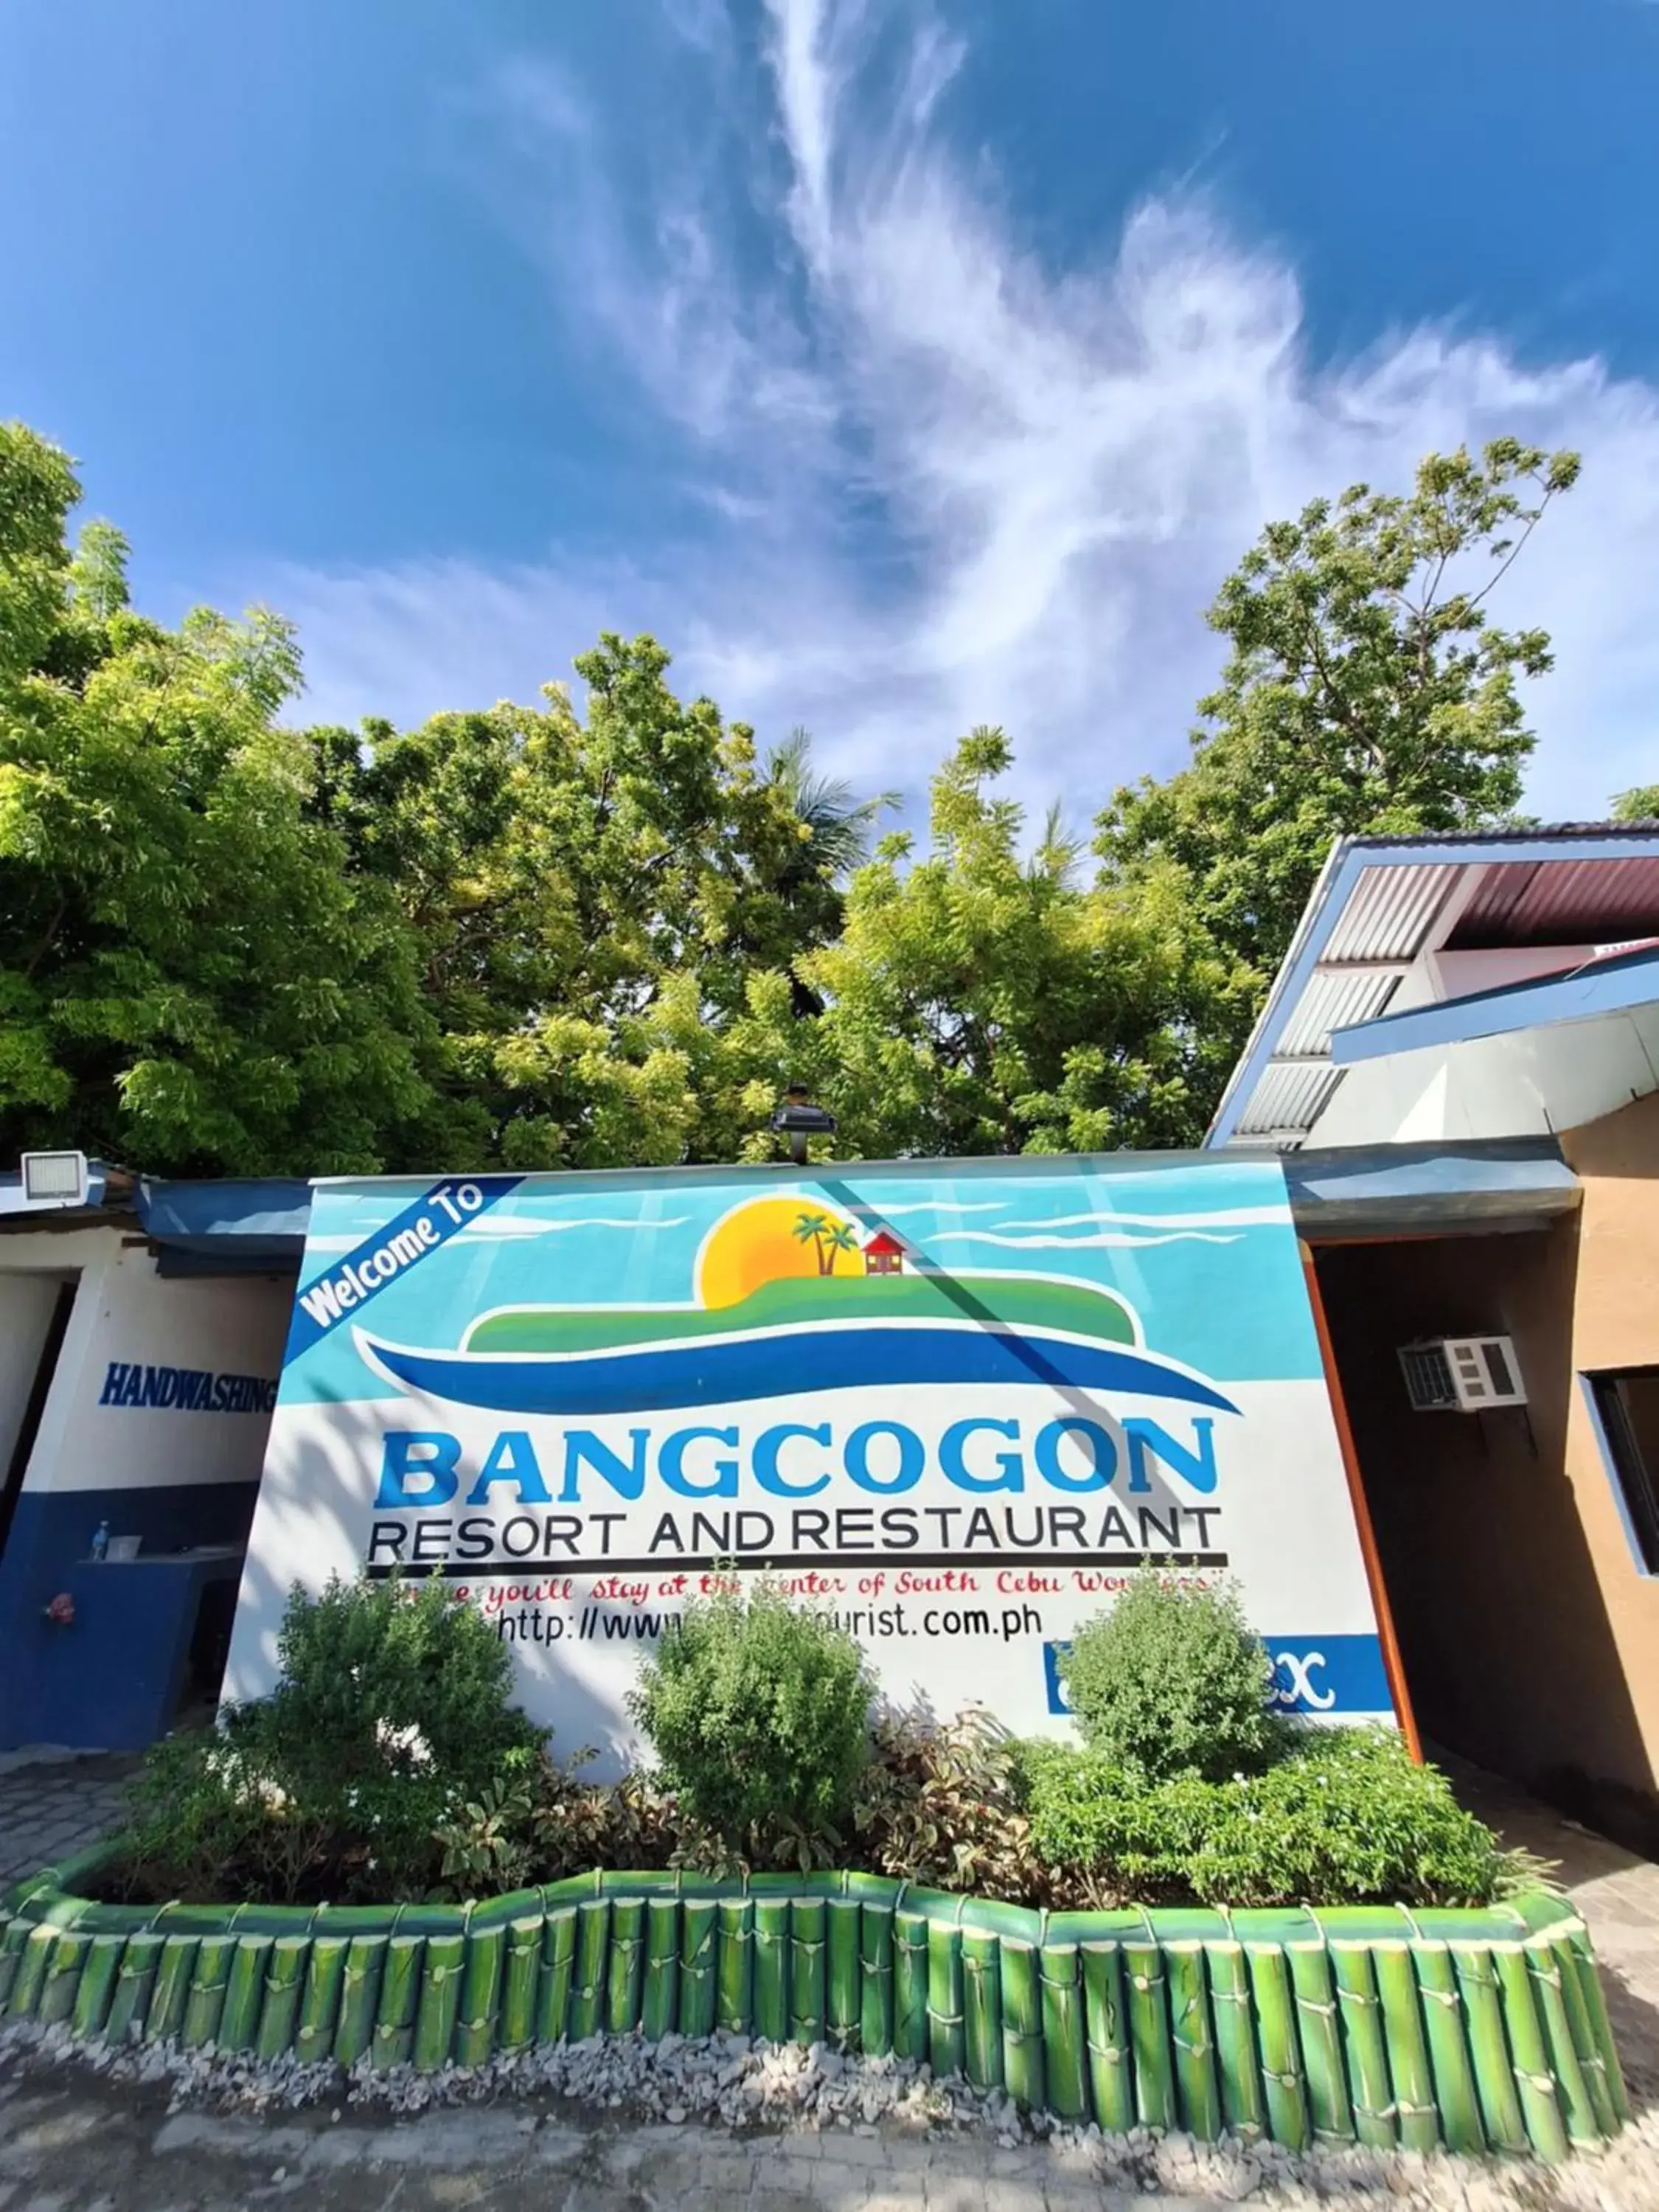 Property building in Island Front - Bangcogon Resort and Restaurant